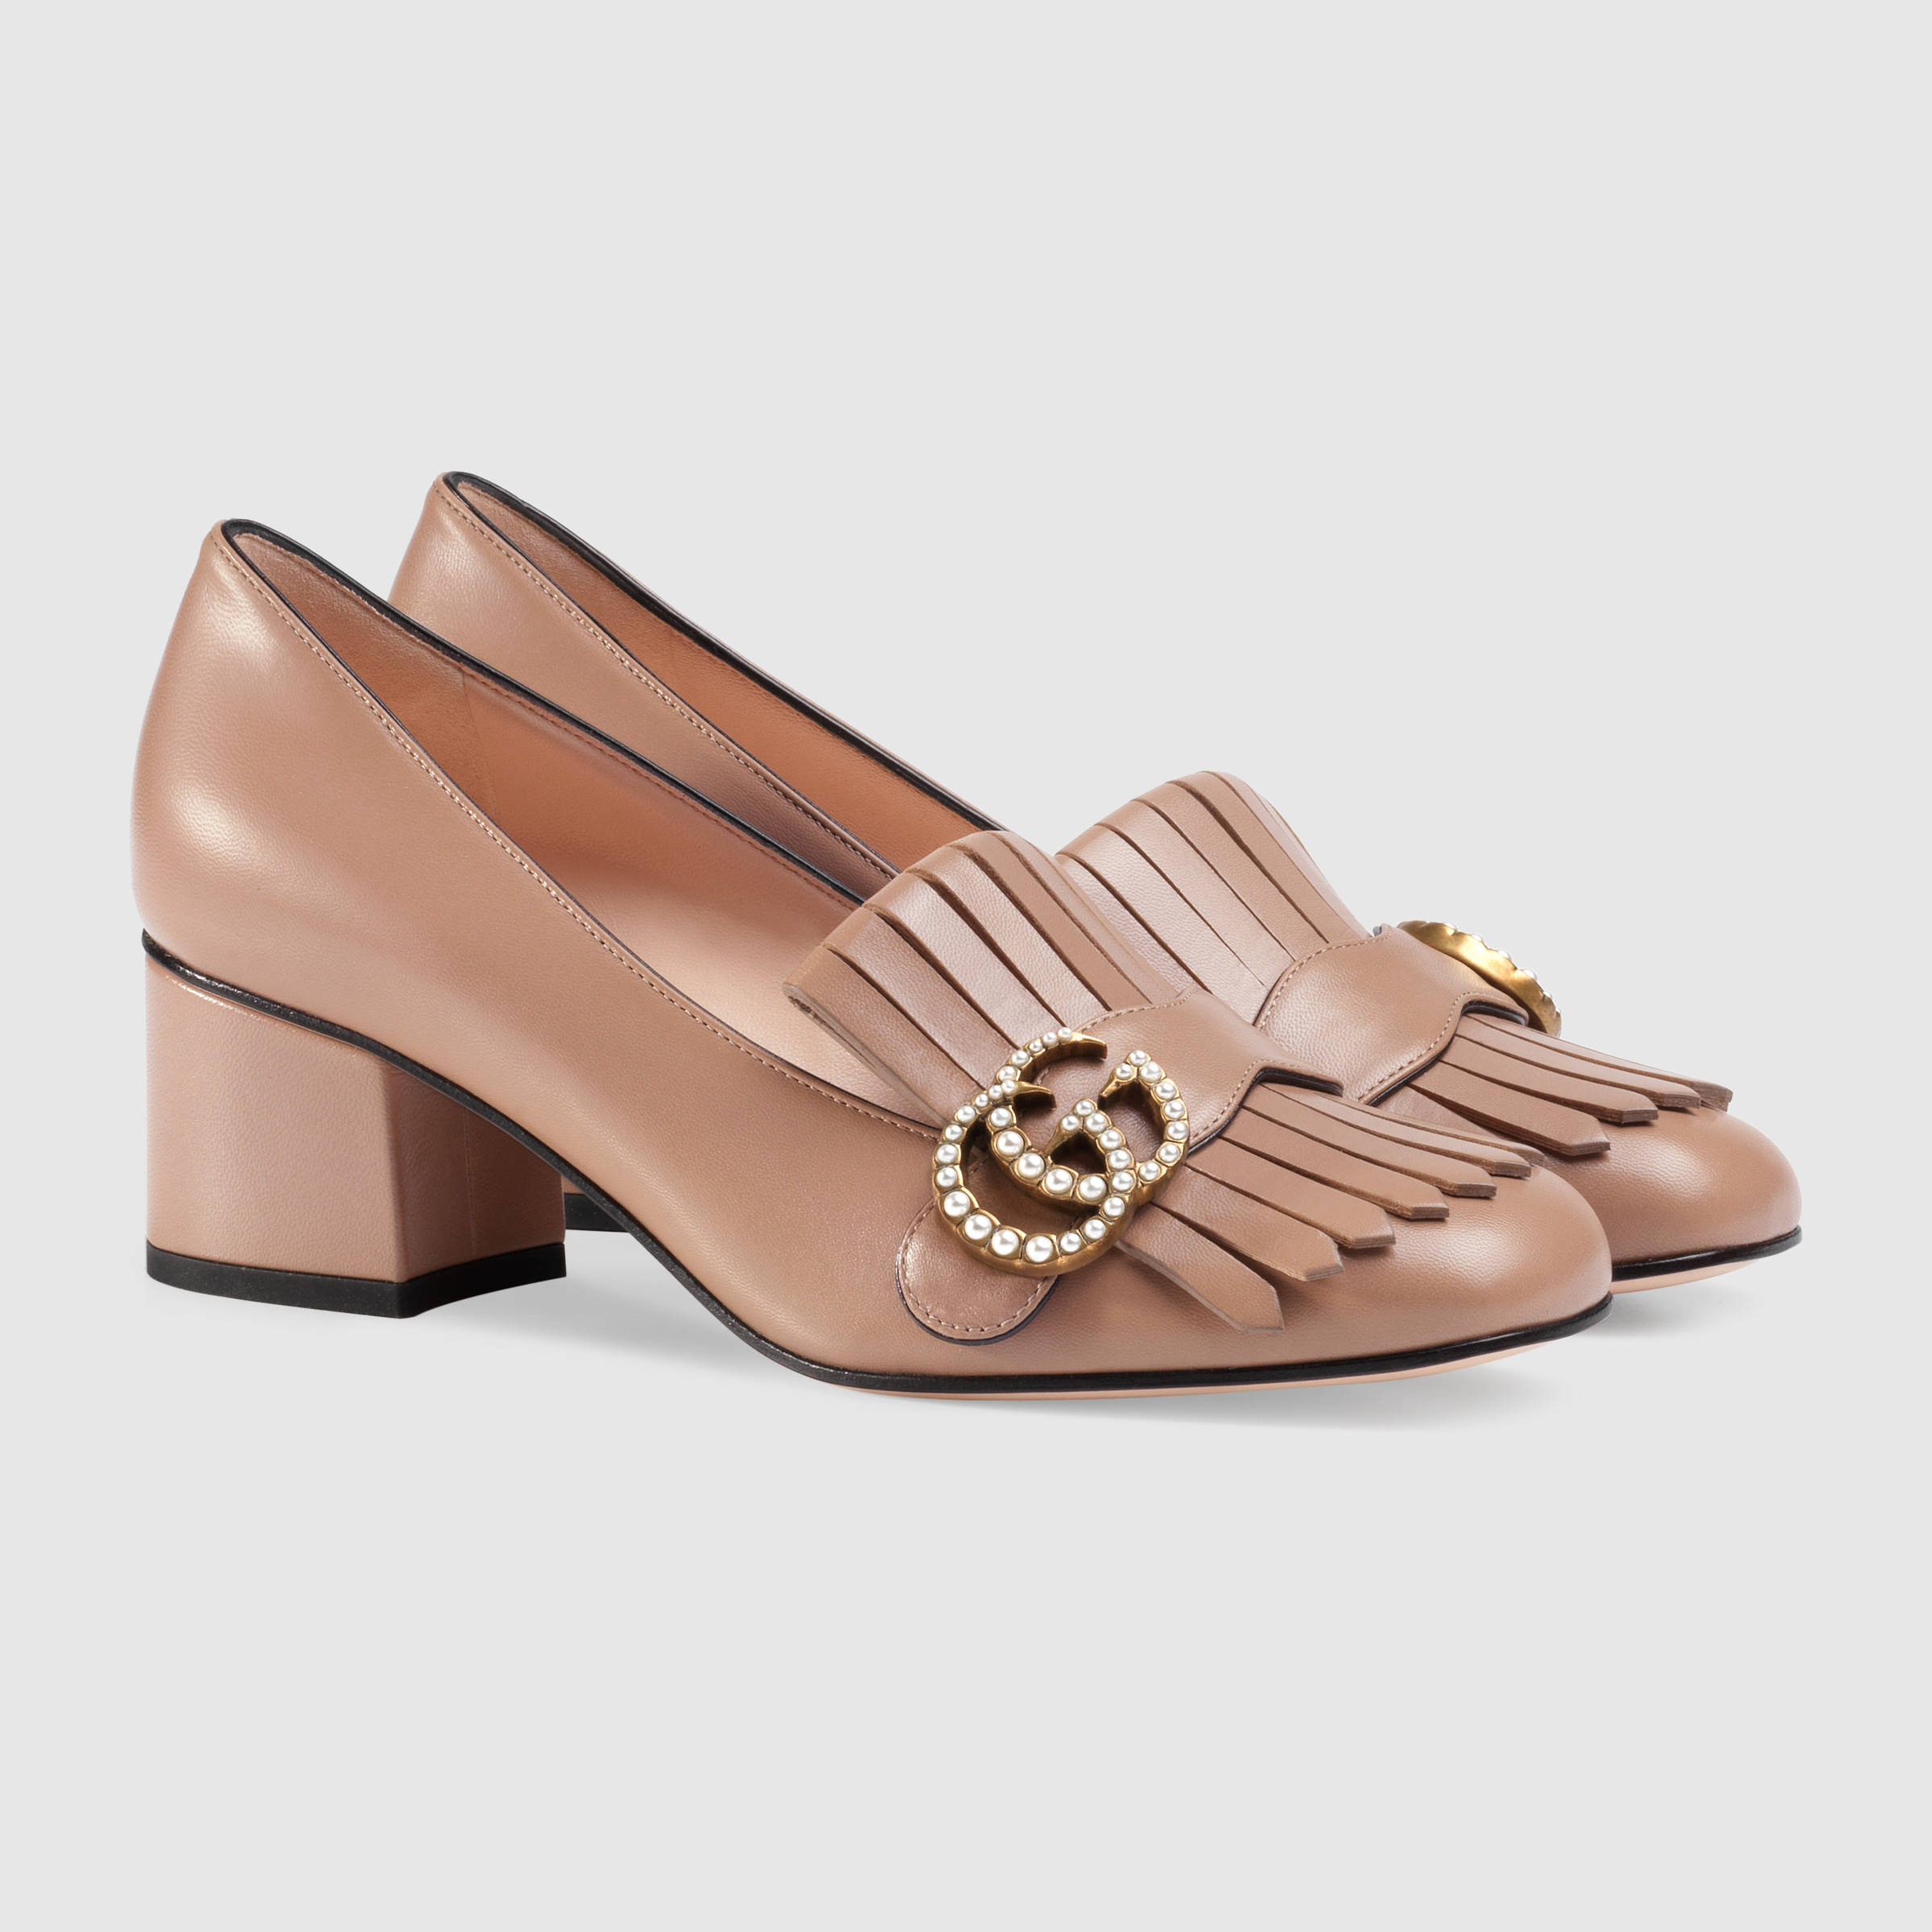 nude gucci shoes, OFF 71%,www 